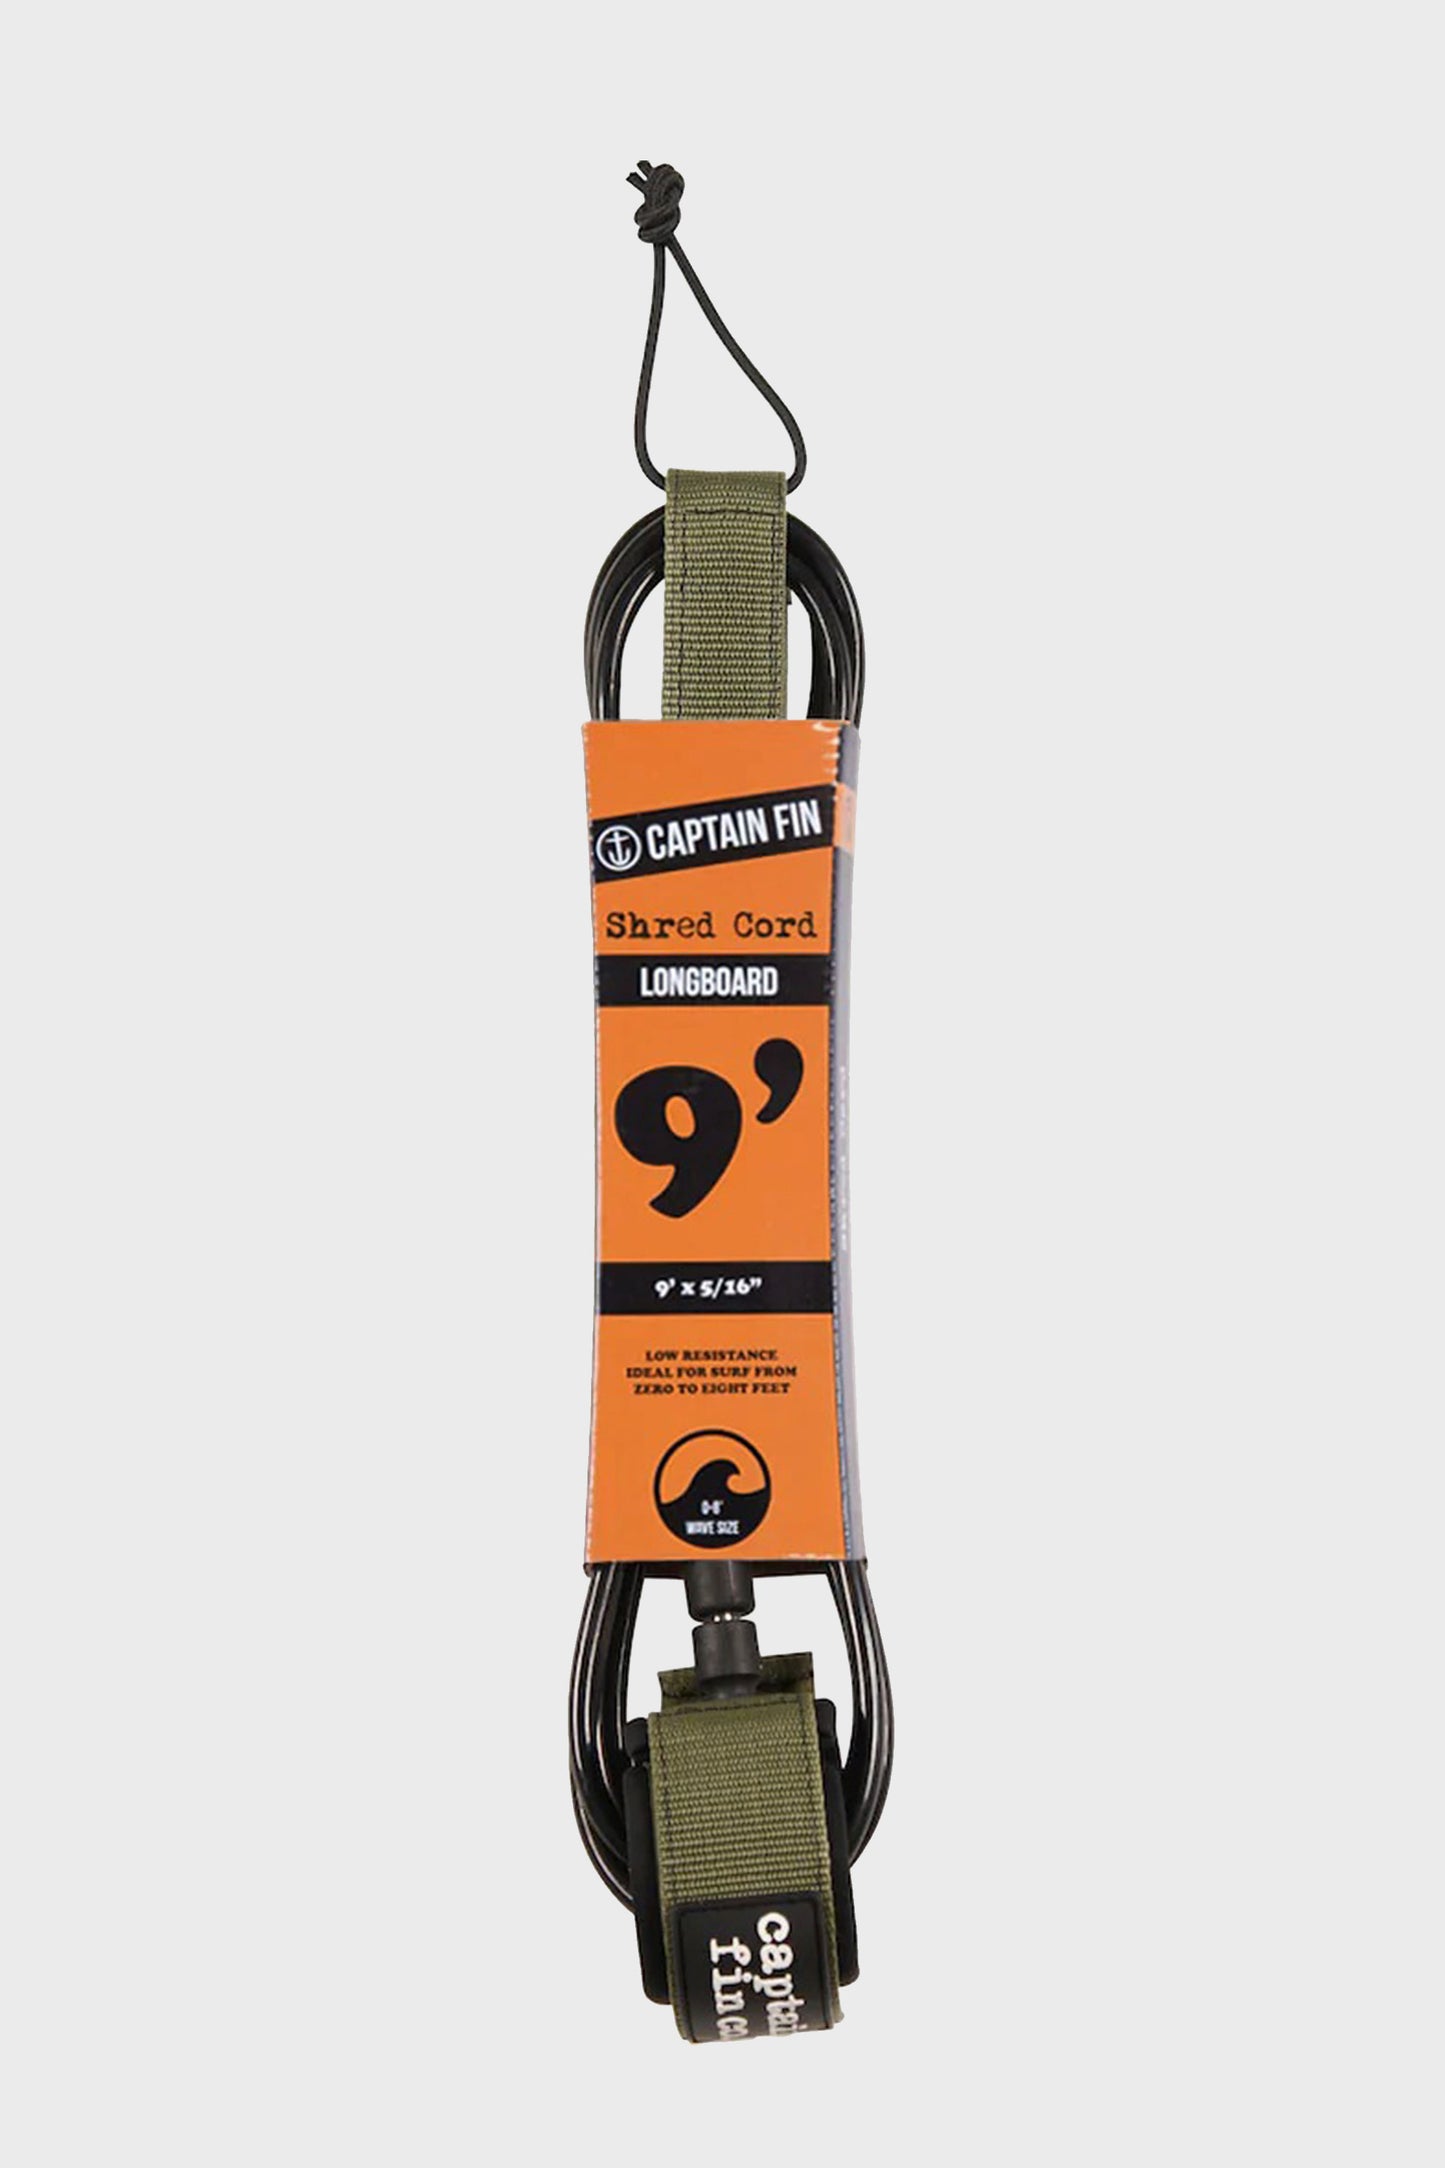 Pukas-Surf-Shop-Captain-Fin-leashes-Shred-Cord-9-army